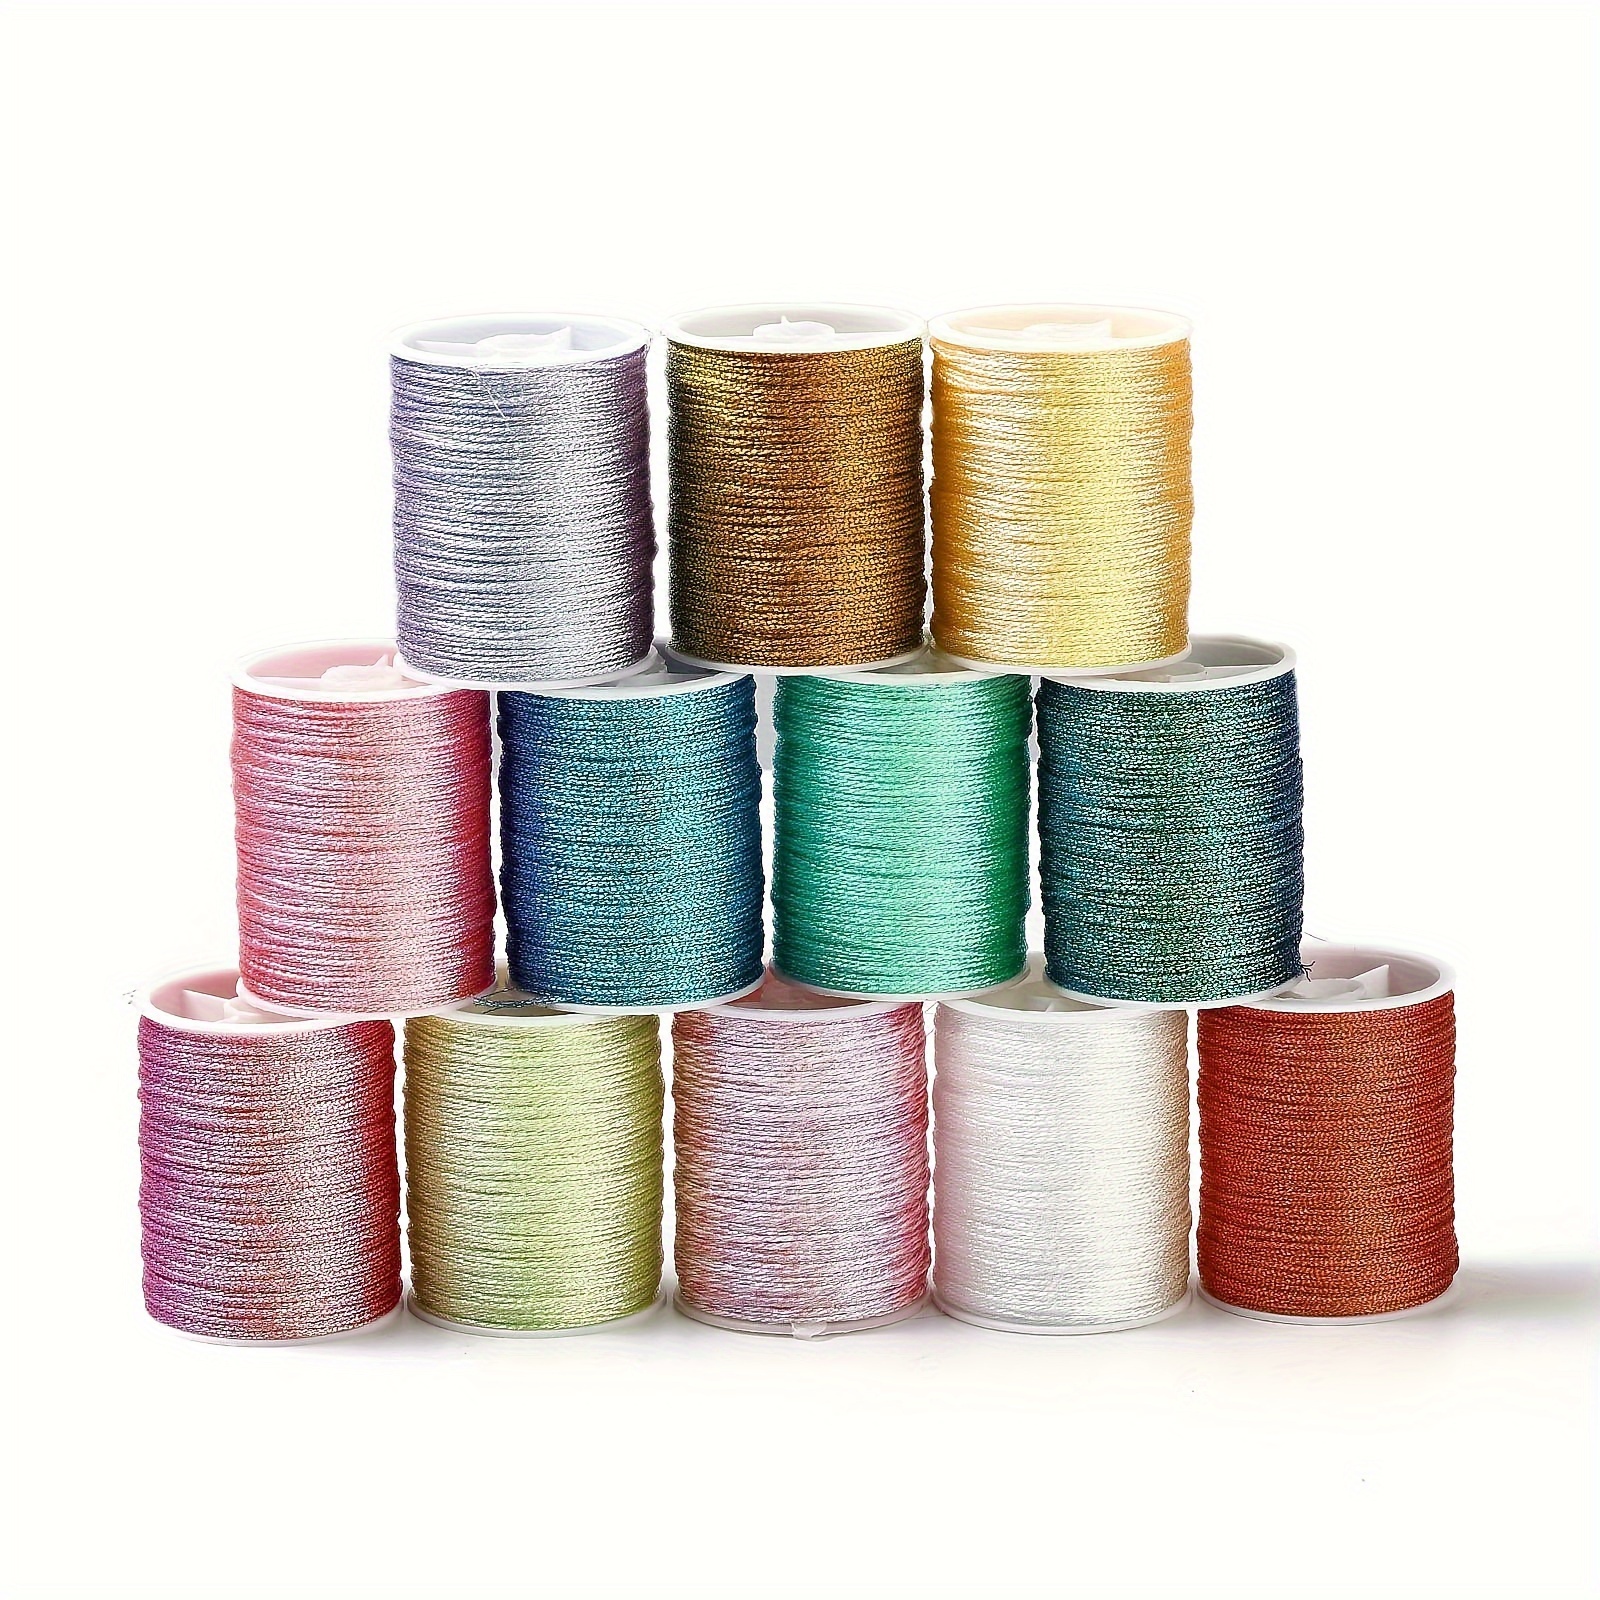 

12 Rolls Of 0.5mm 6-ply Polyester Beading Cord Thread In 12 Assorted Colors, 18-20m Per Roll, Inelastic Material For Jewelry Making